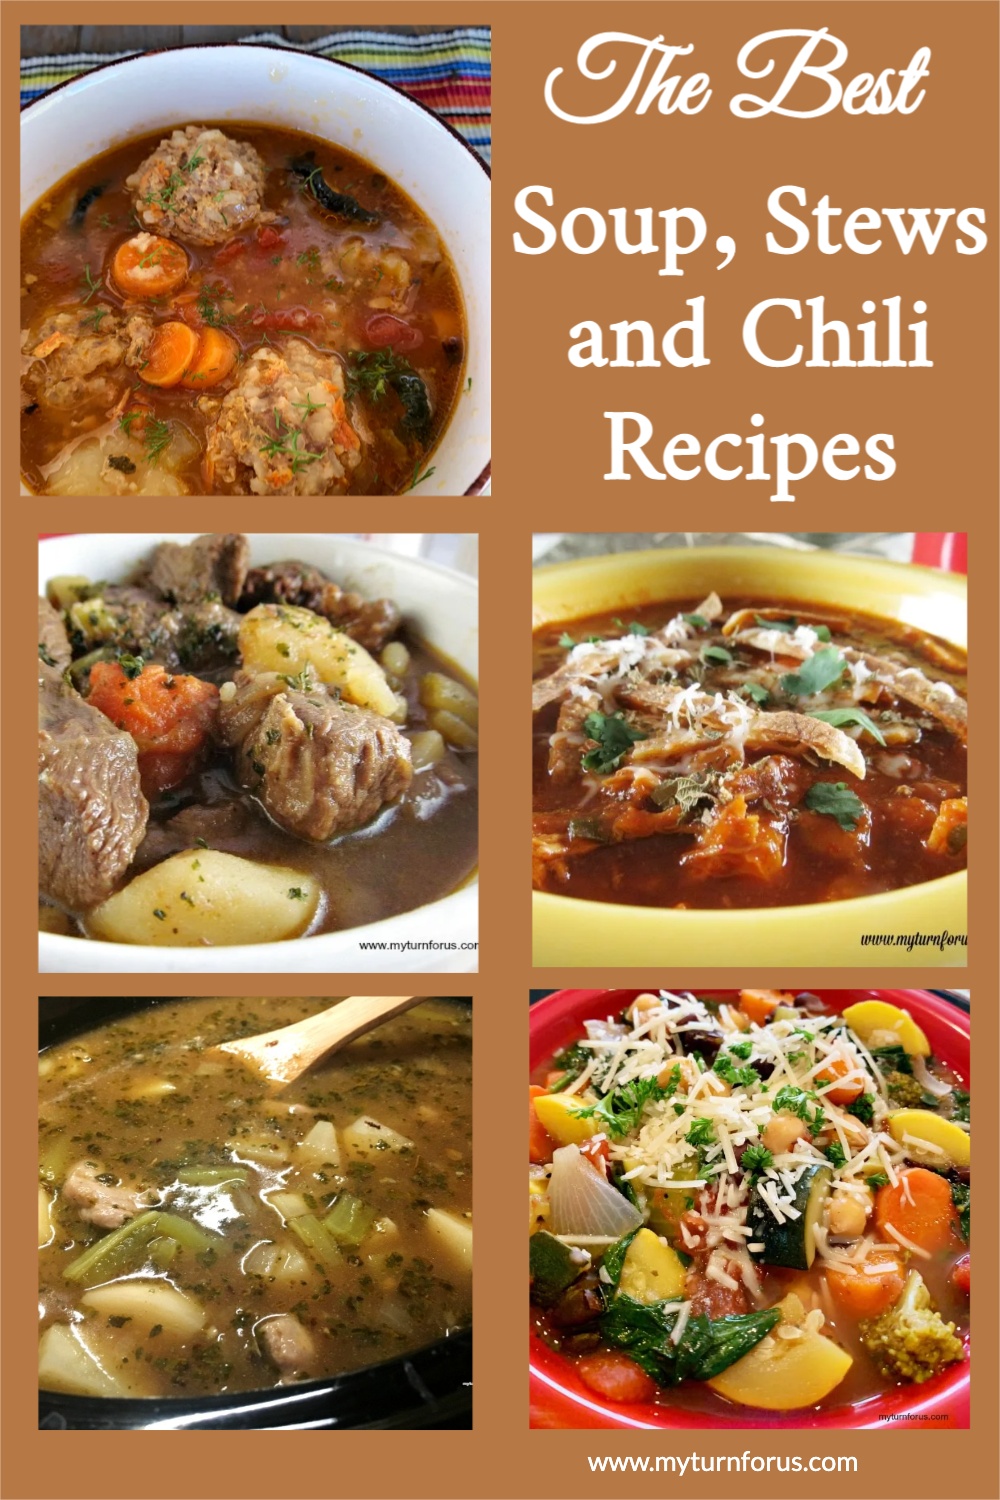 https://www.myturnforus.com/wp-content/uploads/2015/02/Our-Best-Soup-Recipes-Stews-and-Chili-Recipes-My-Turn-for-Us.jpeg